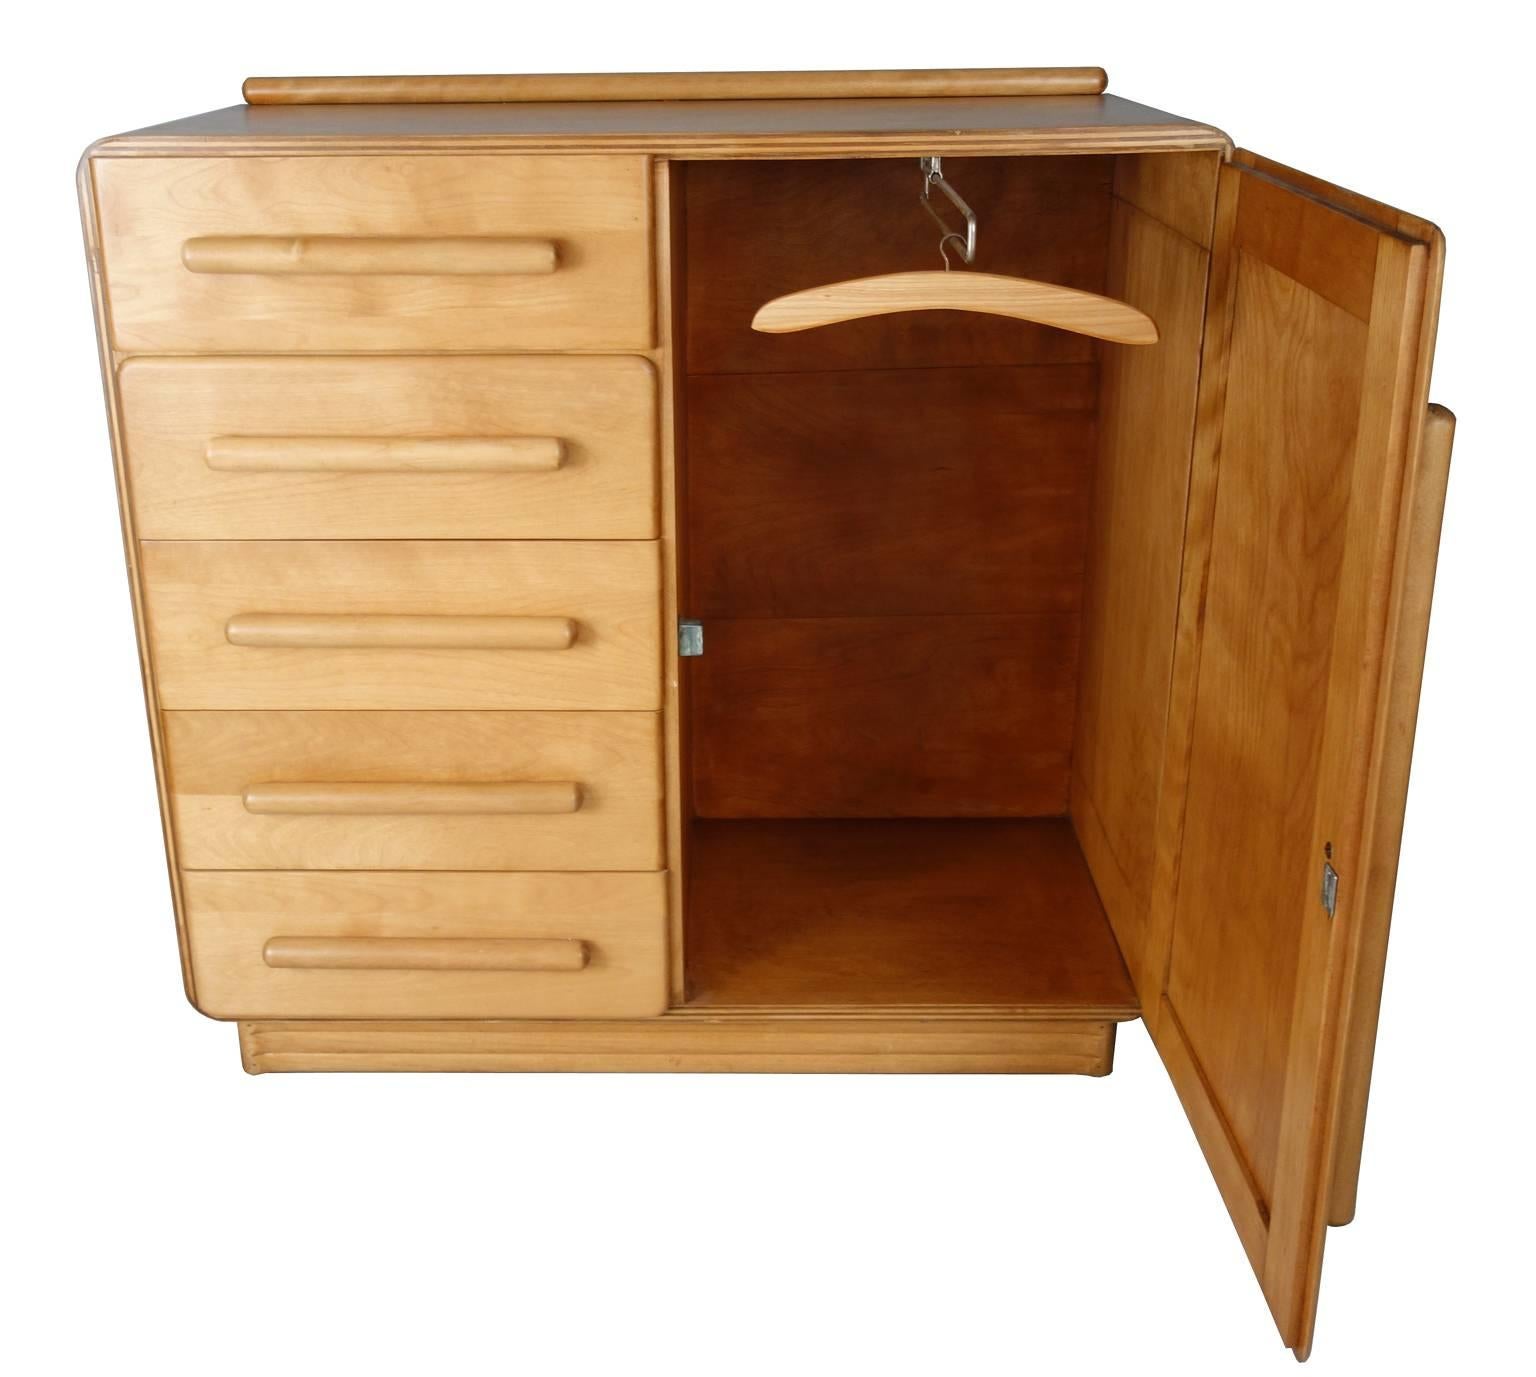 Hard to find a Mid-Century changing station. This solid and well-made cabinet is constructed with a combination of solid maple and maple ply. Has a nice warm glowing patina. No identifying markers. In the sale of Heywood-Wakefield and T.H.